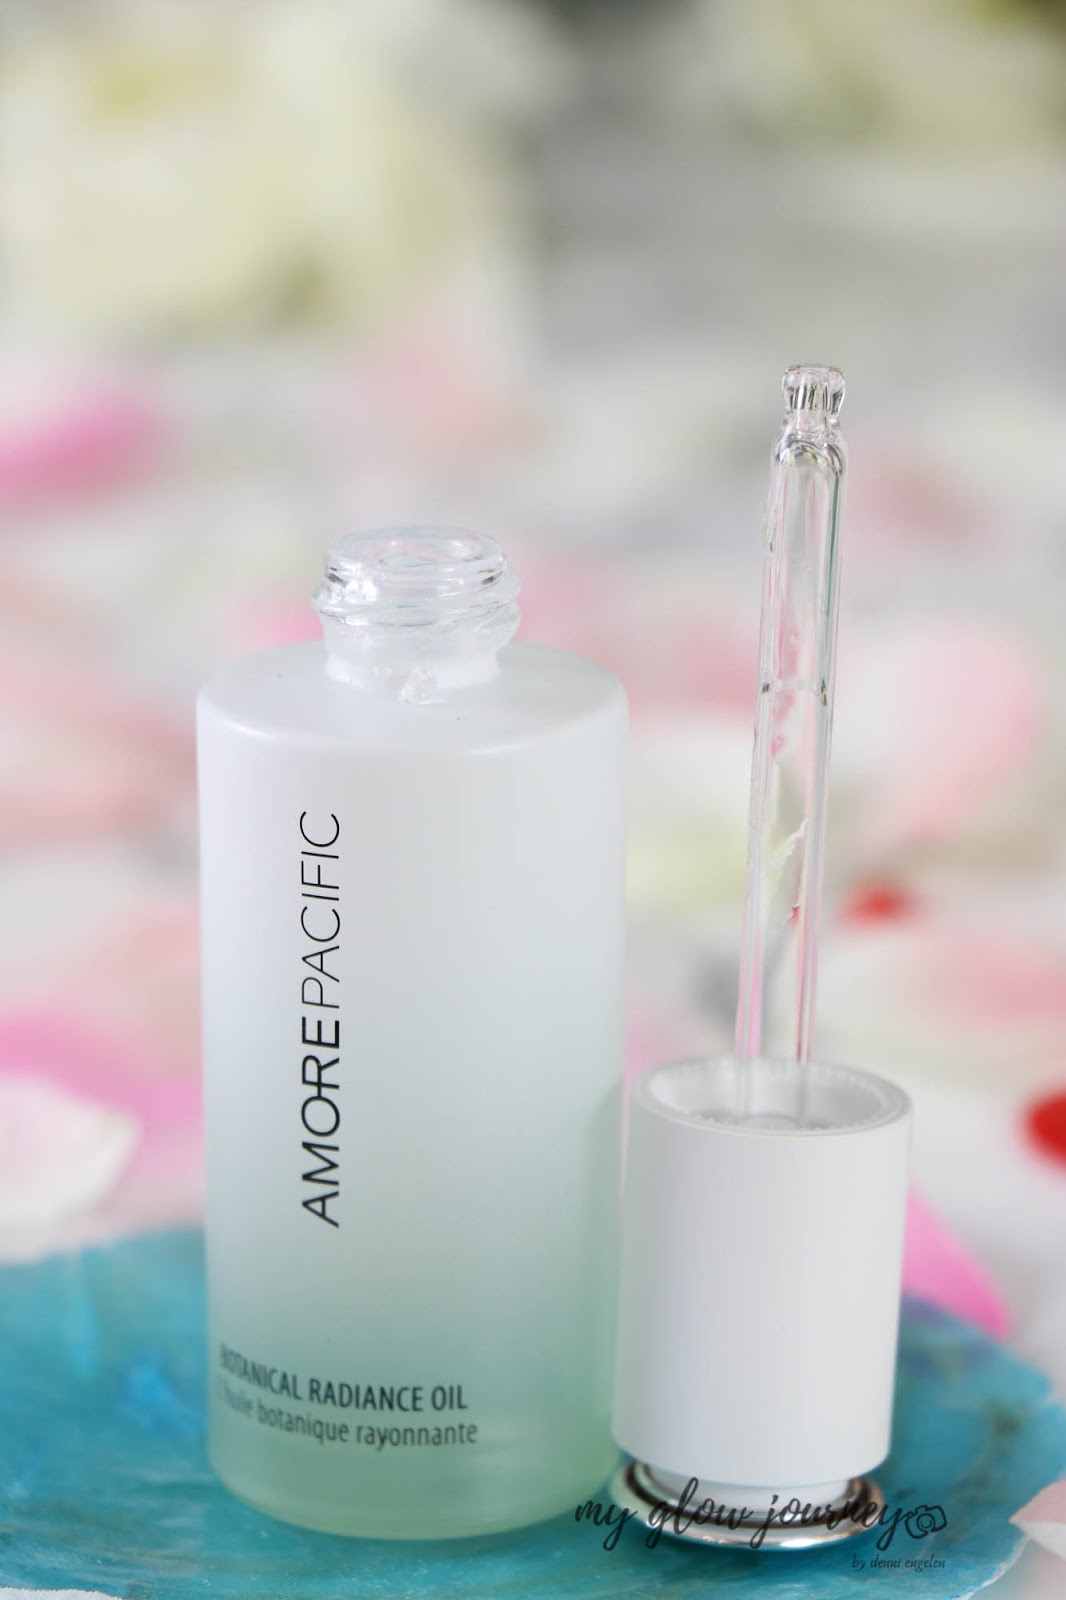 Amorepacific Botanical Radiance Oil Review